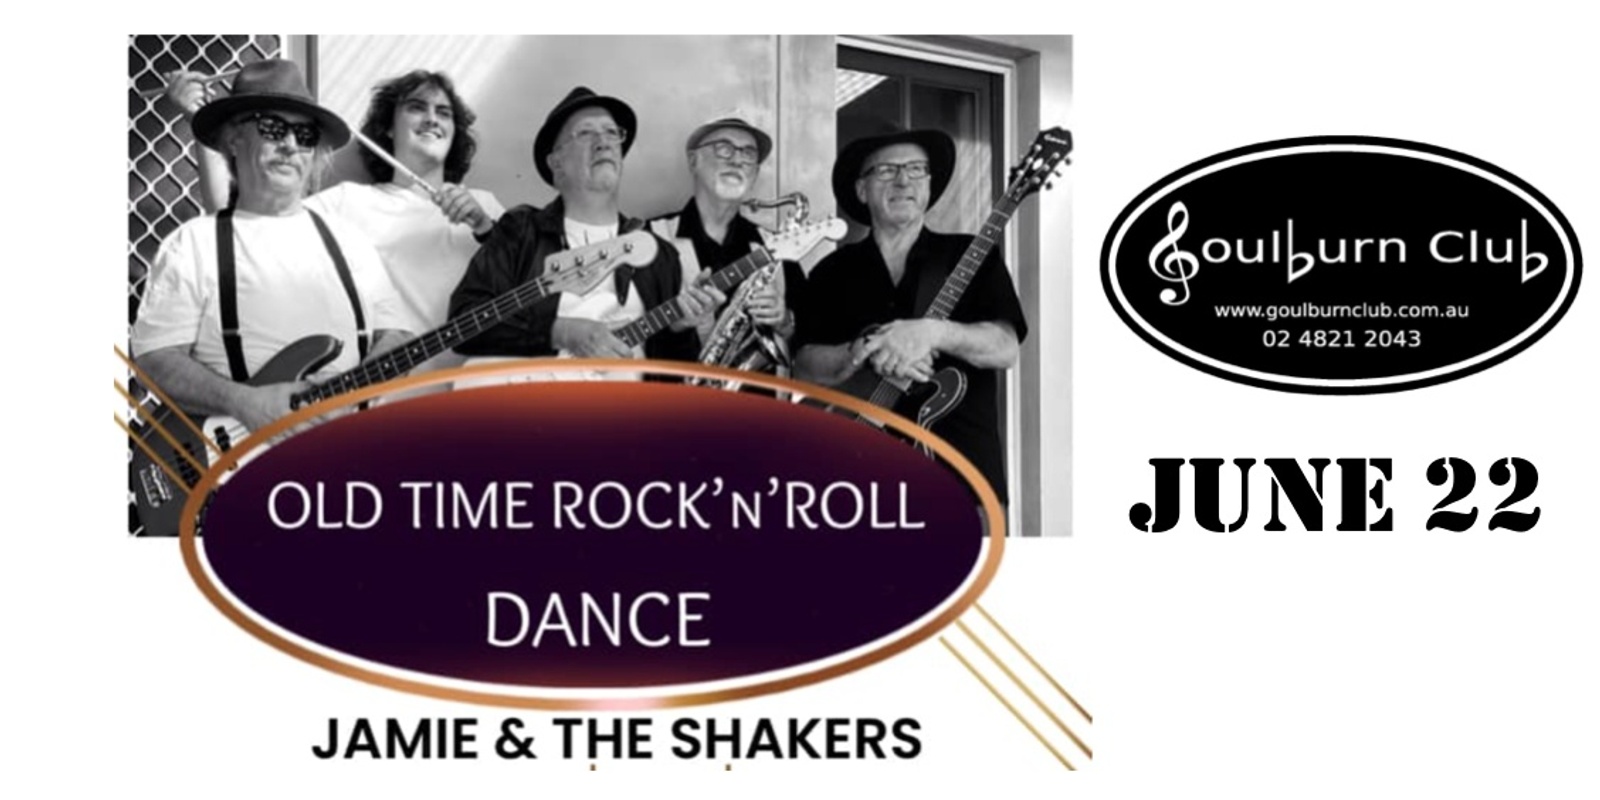 Banner image for Jamie & The Shakers at The Goulburn Club